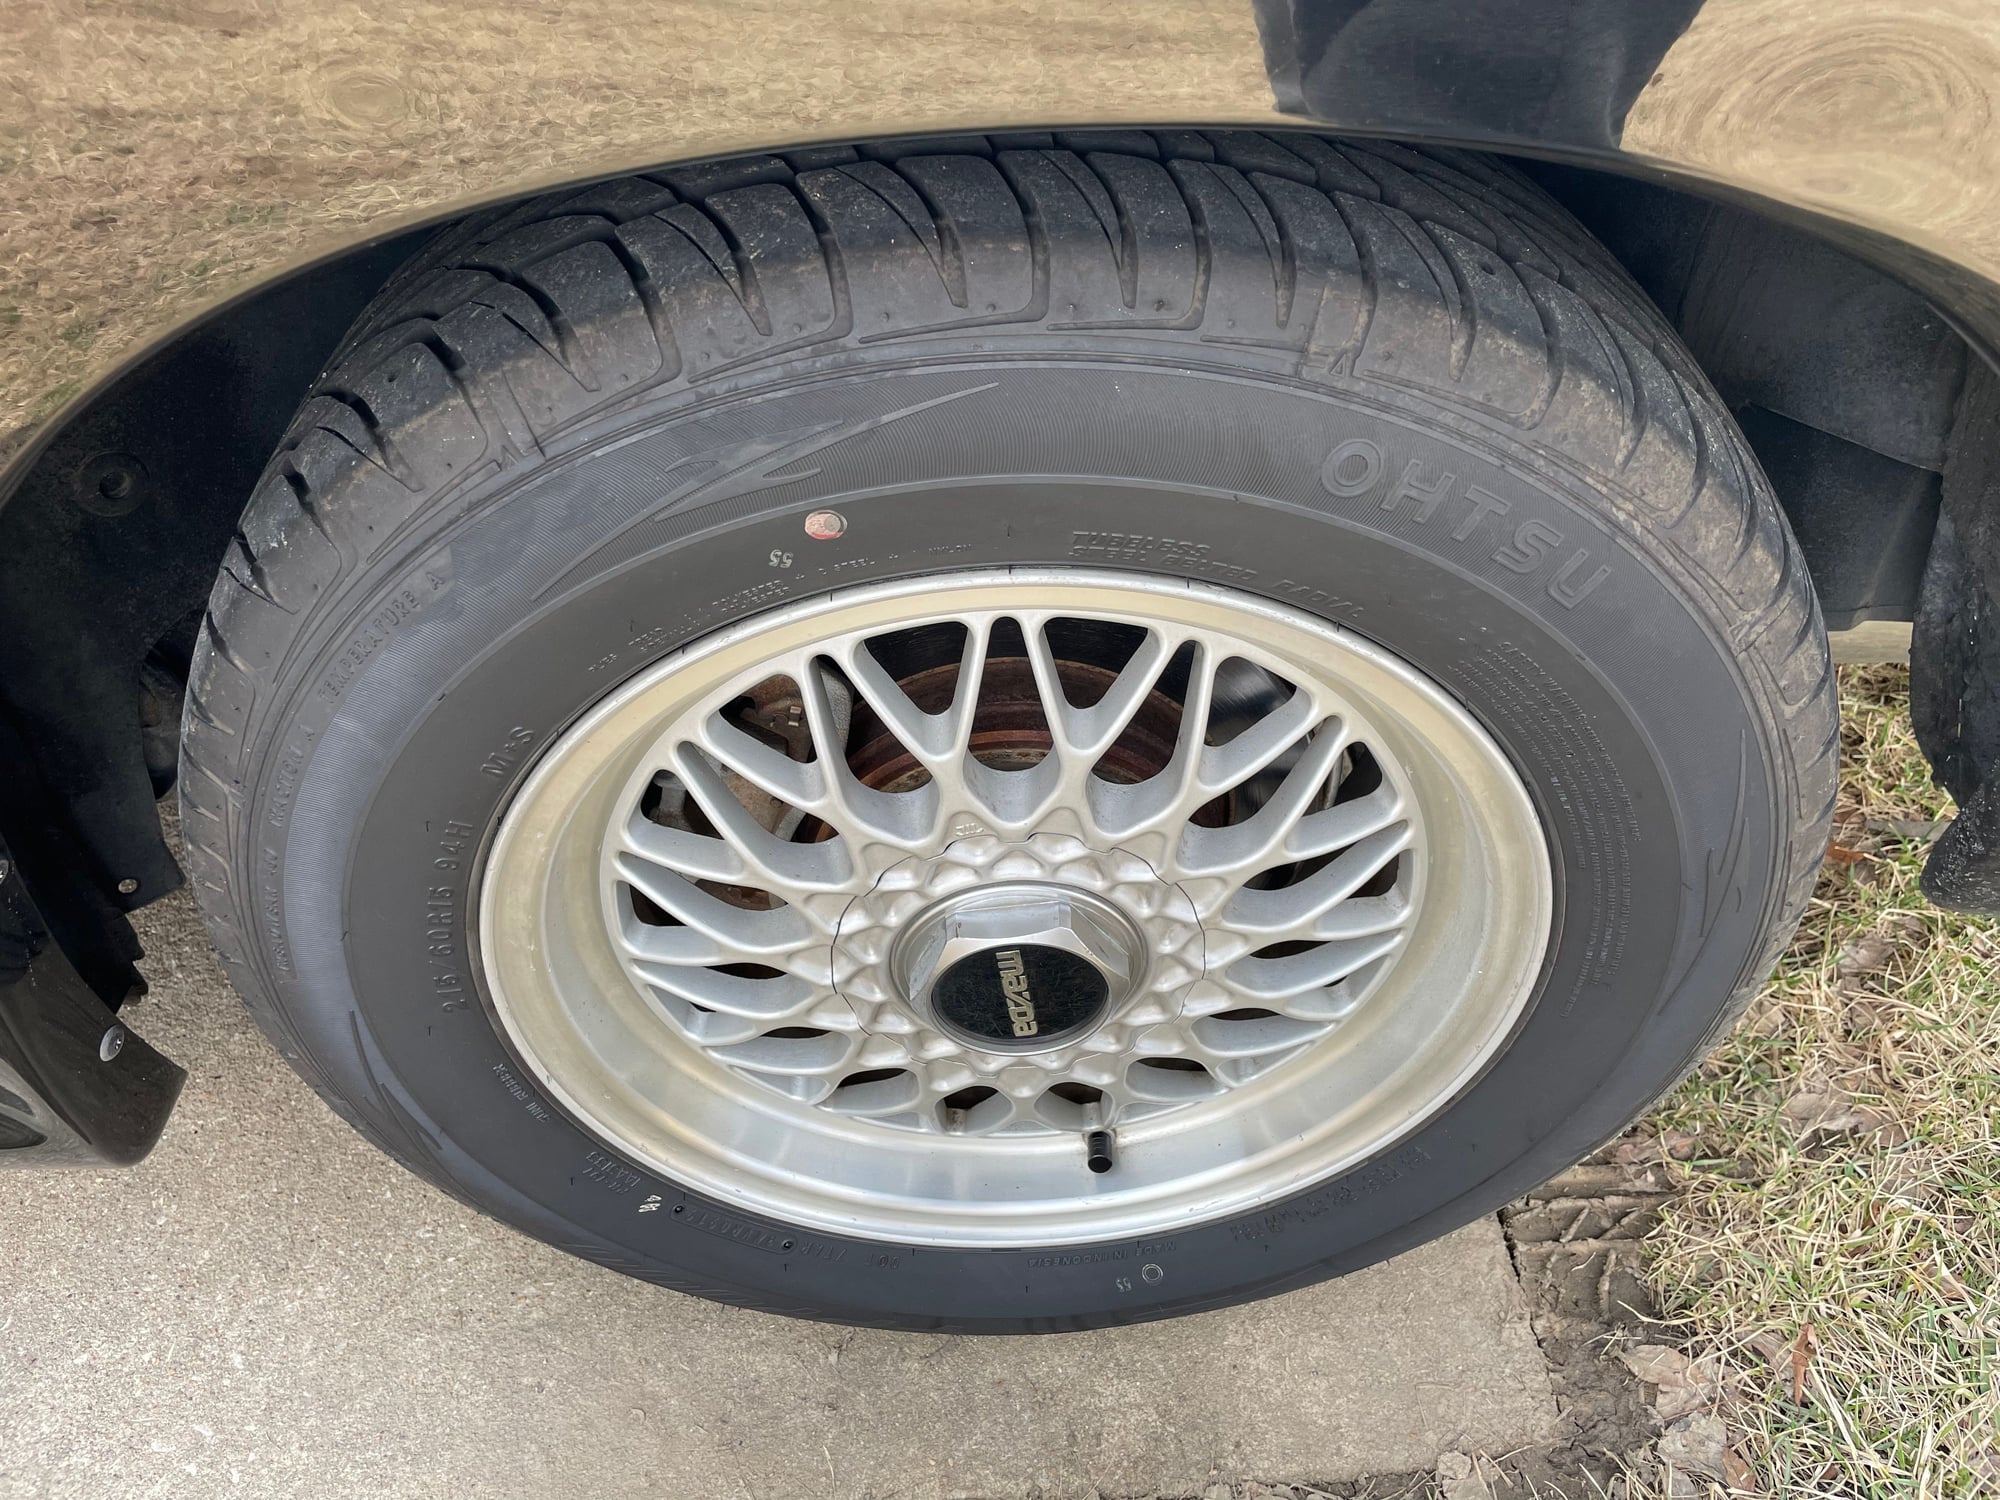 Wheels and Tires/Axles - Vert wheels mounted and blanced - Used - 1986 to 1991 Mazda RX-7 - Saint Louis, MO 63114, United States